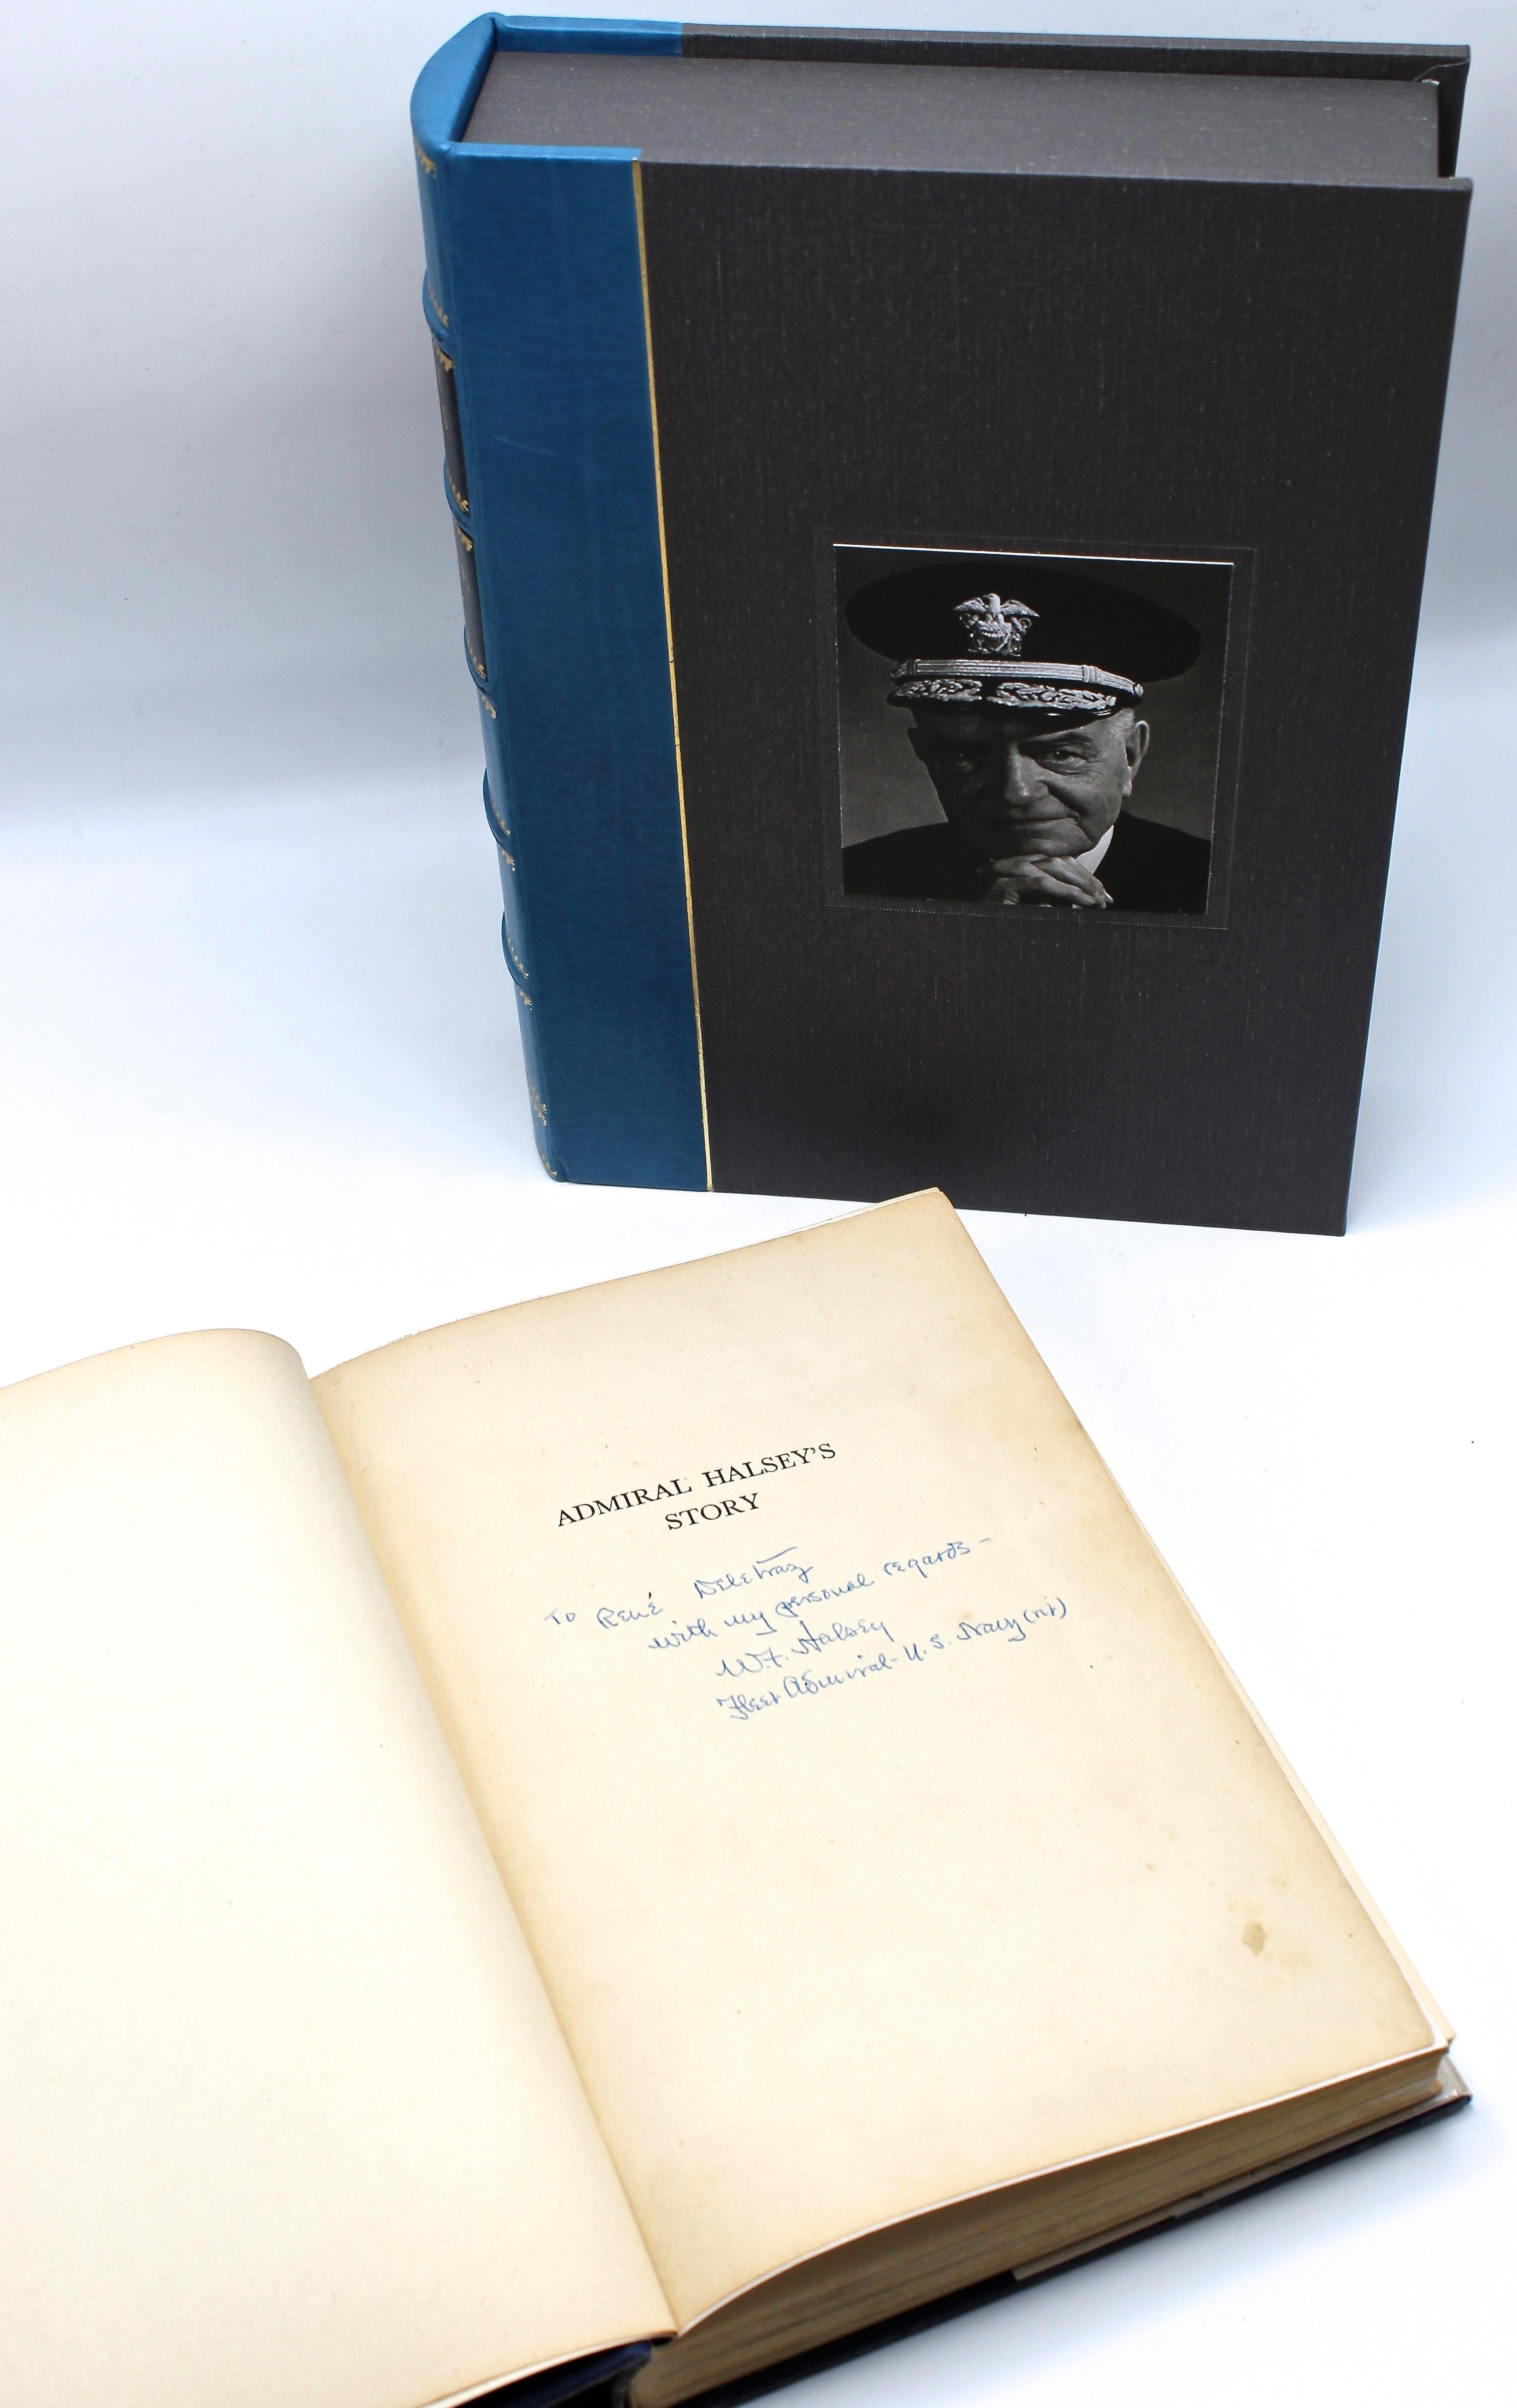 Halsey, Fleet Admiral William F., U.S.N. and Lt. Comdr. J. Bryan, III, U.S.N.R. Admiral Halsey’s Story. New York: Wittlesley House, 1947. Inscribed and signed first edition. Presented in original dust jacket with custom clamshell.

This first